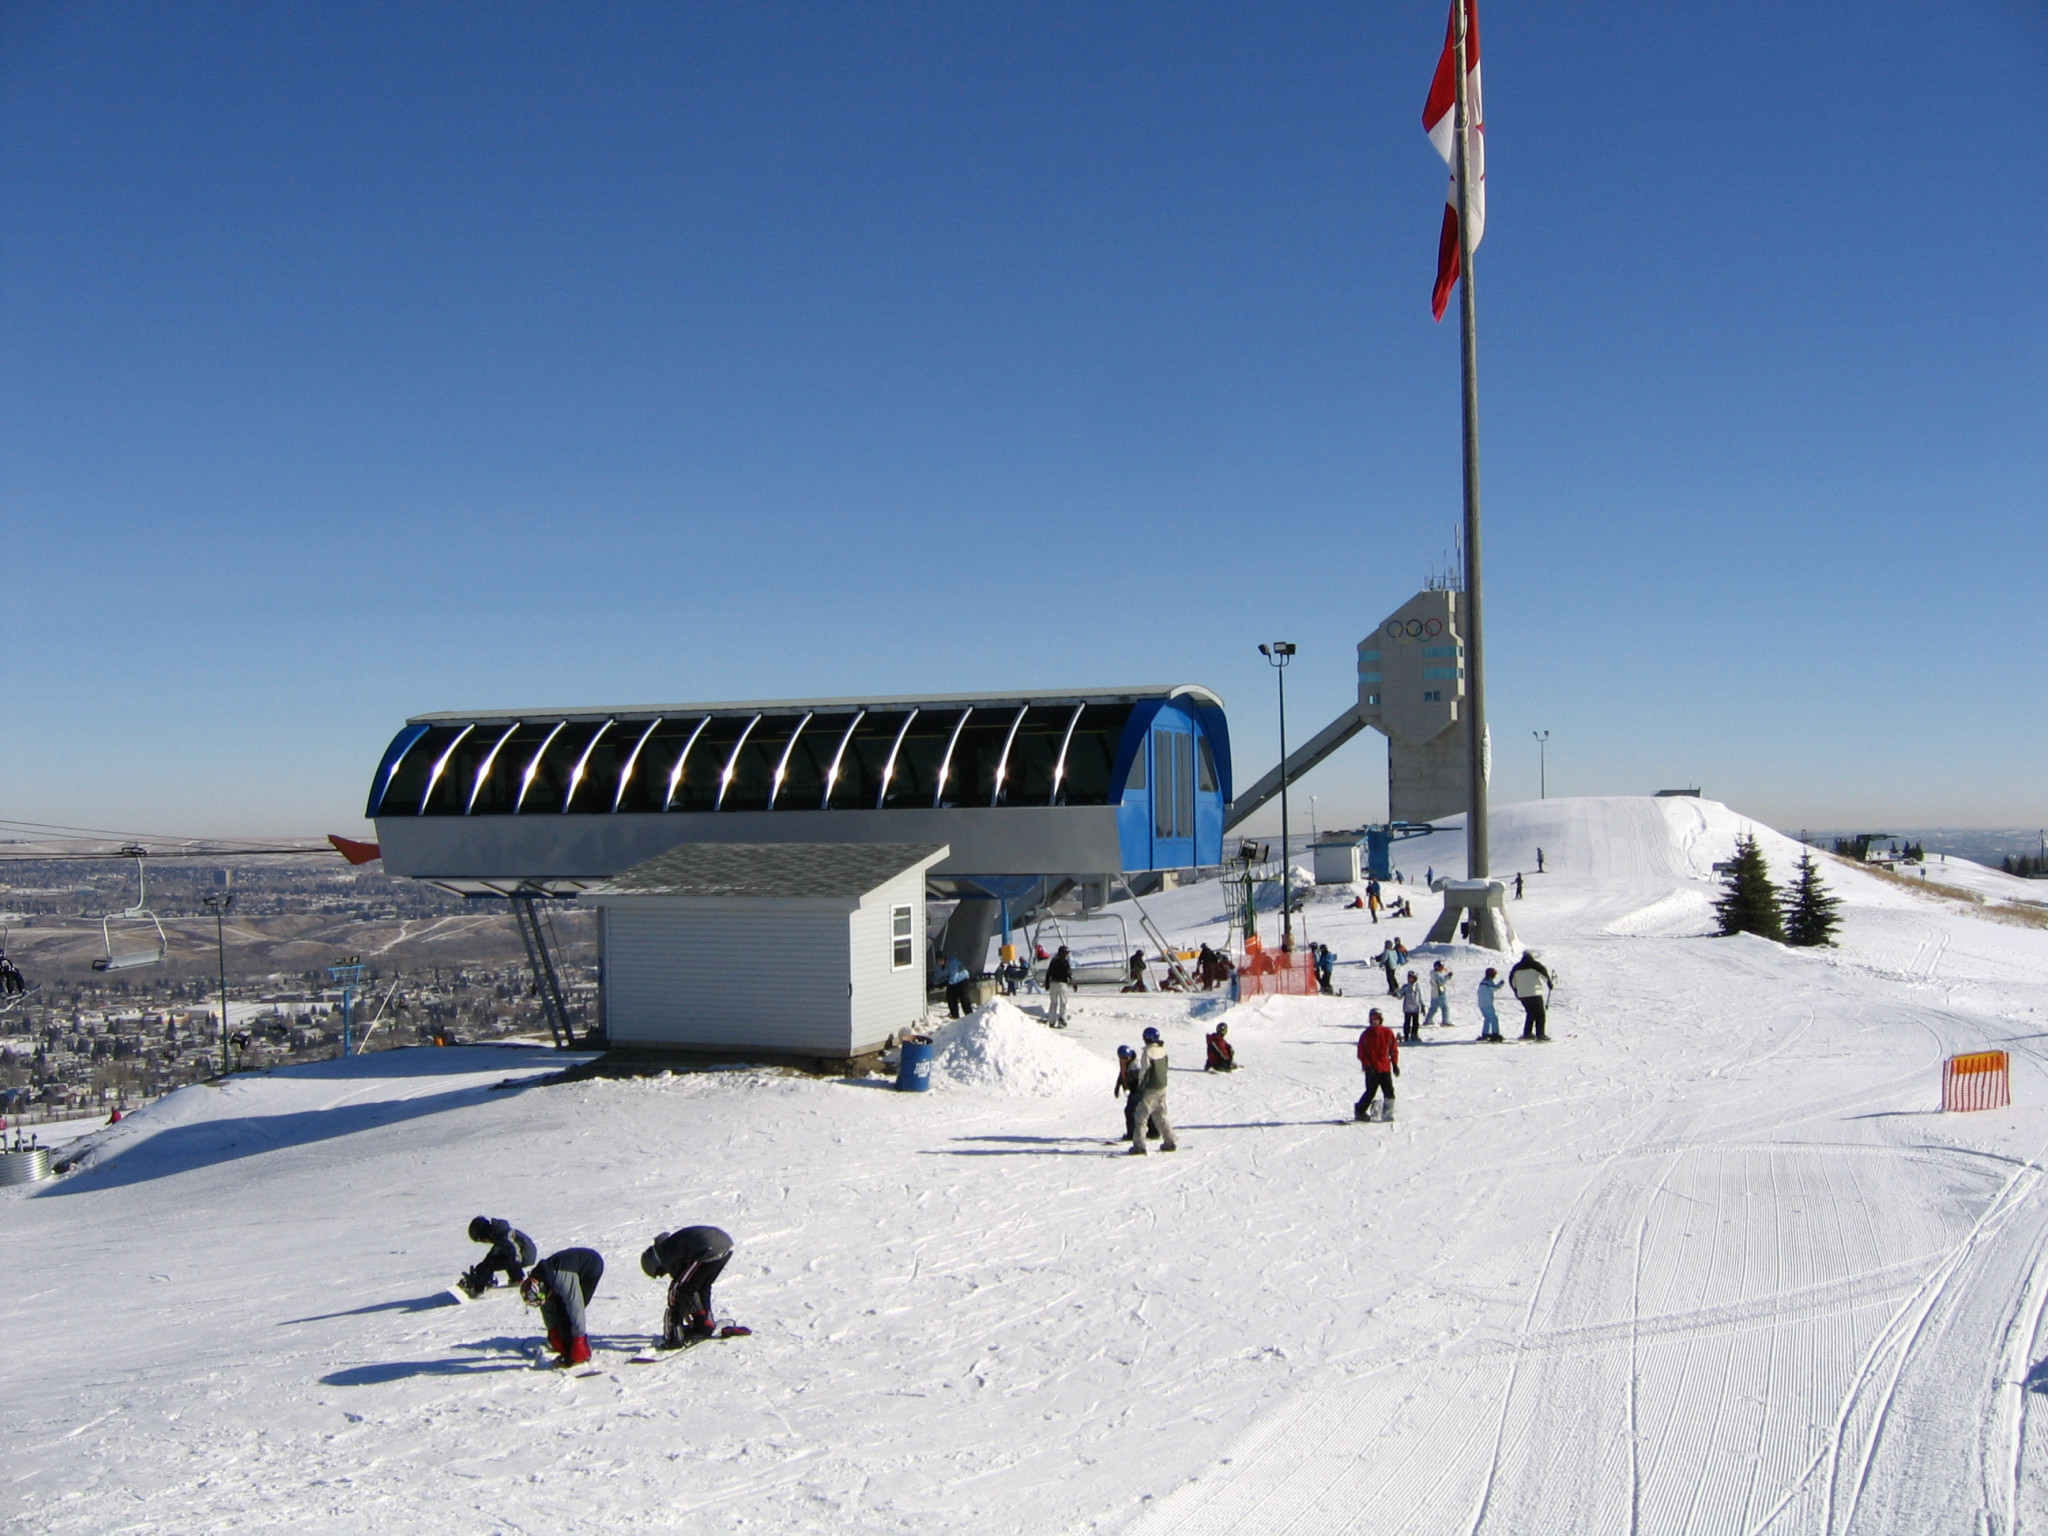 The Canada Olympic Park could be used as a winter sport hub in Calgary ©Wikipedia